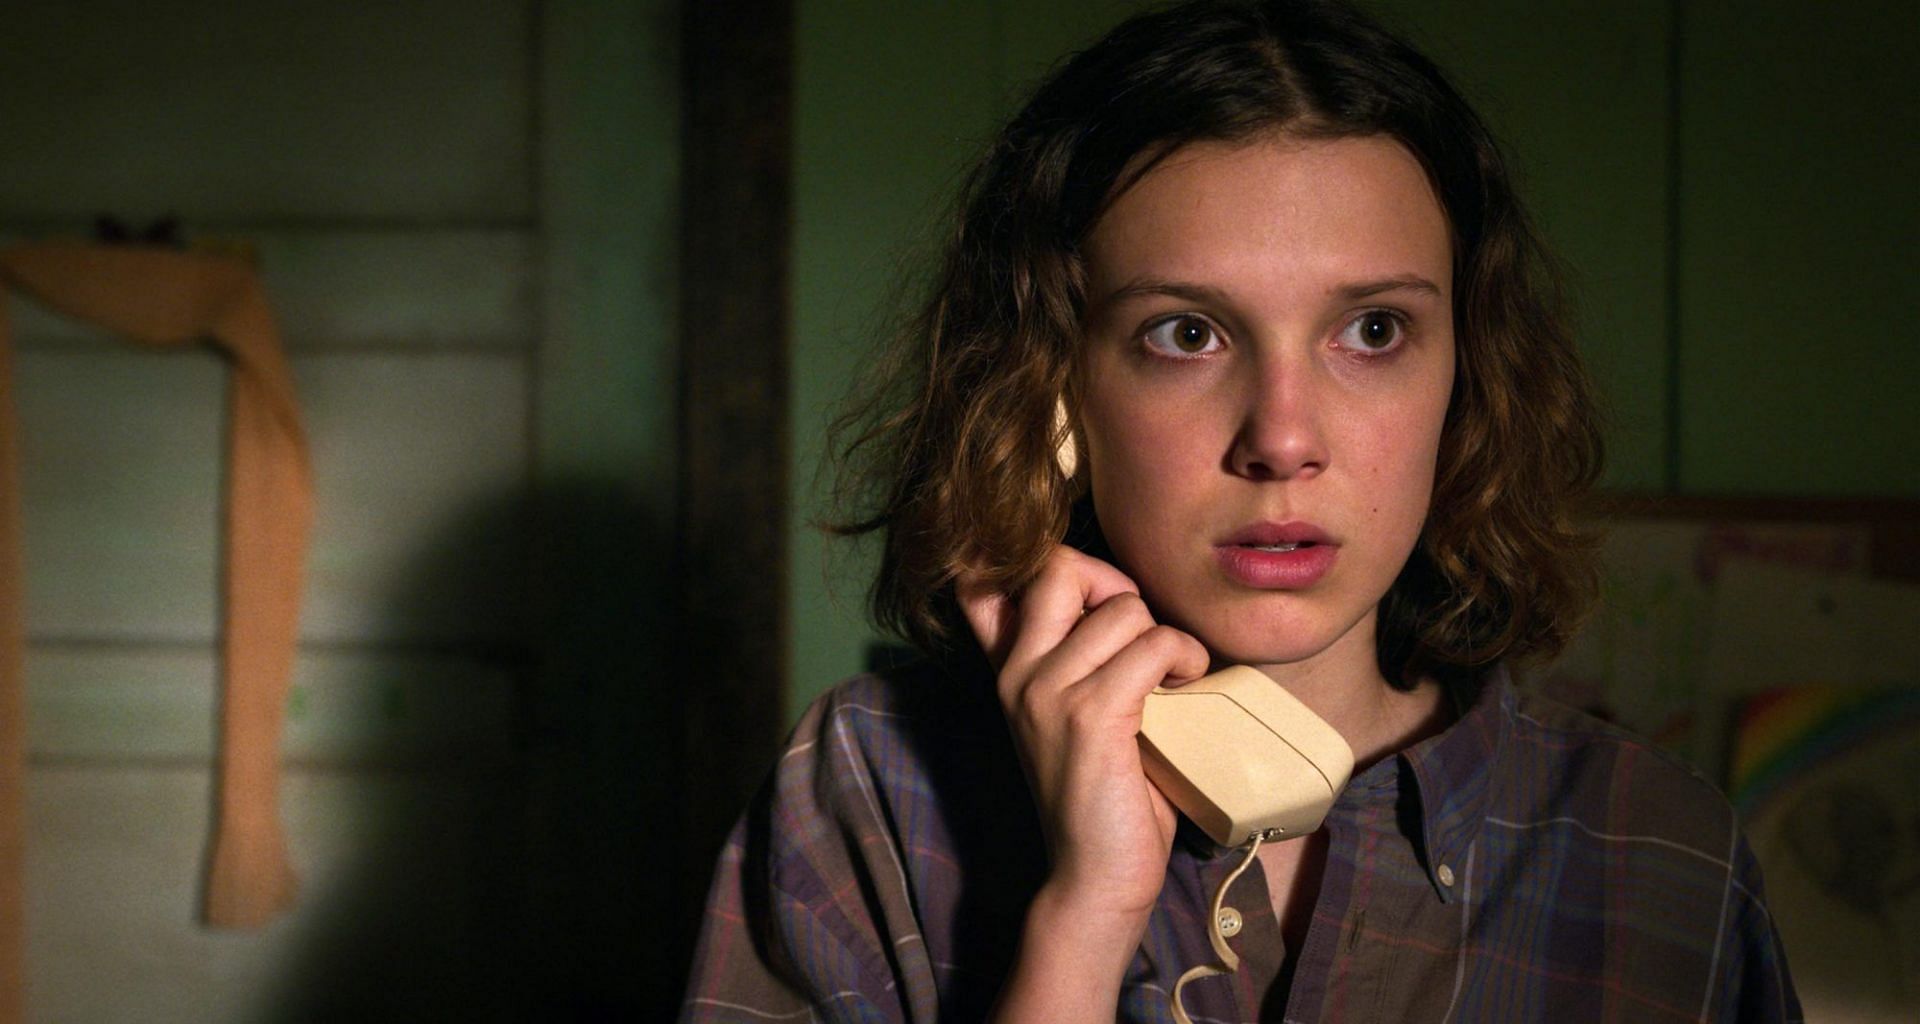 Millie Bobby Brown as Eleven in Stranger Things (Image via Netflix)